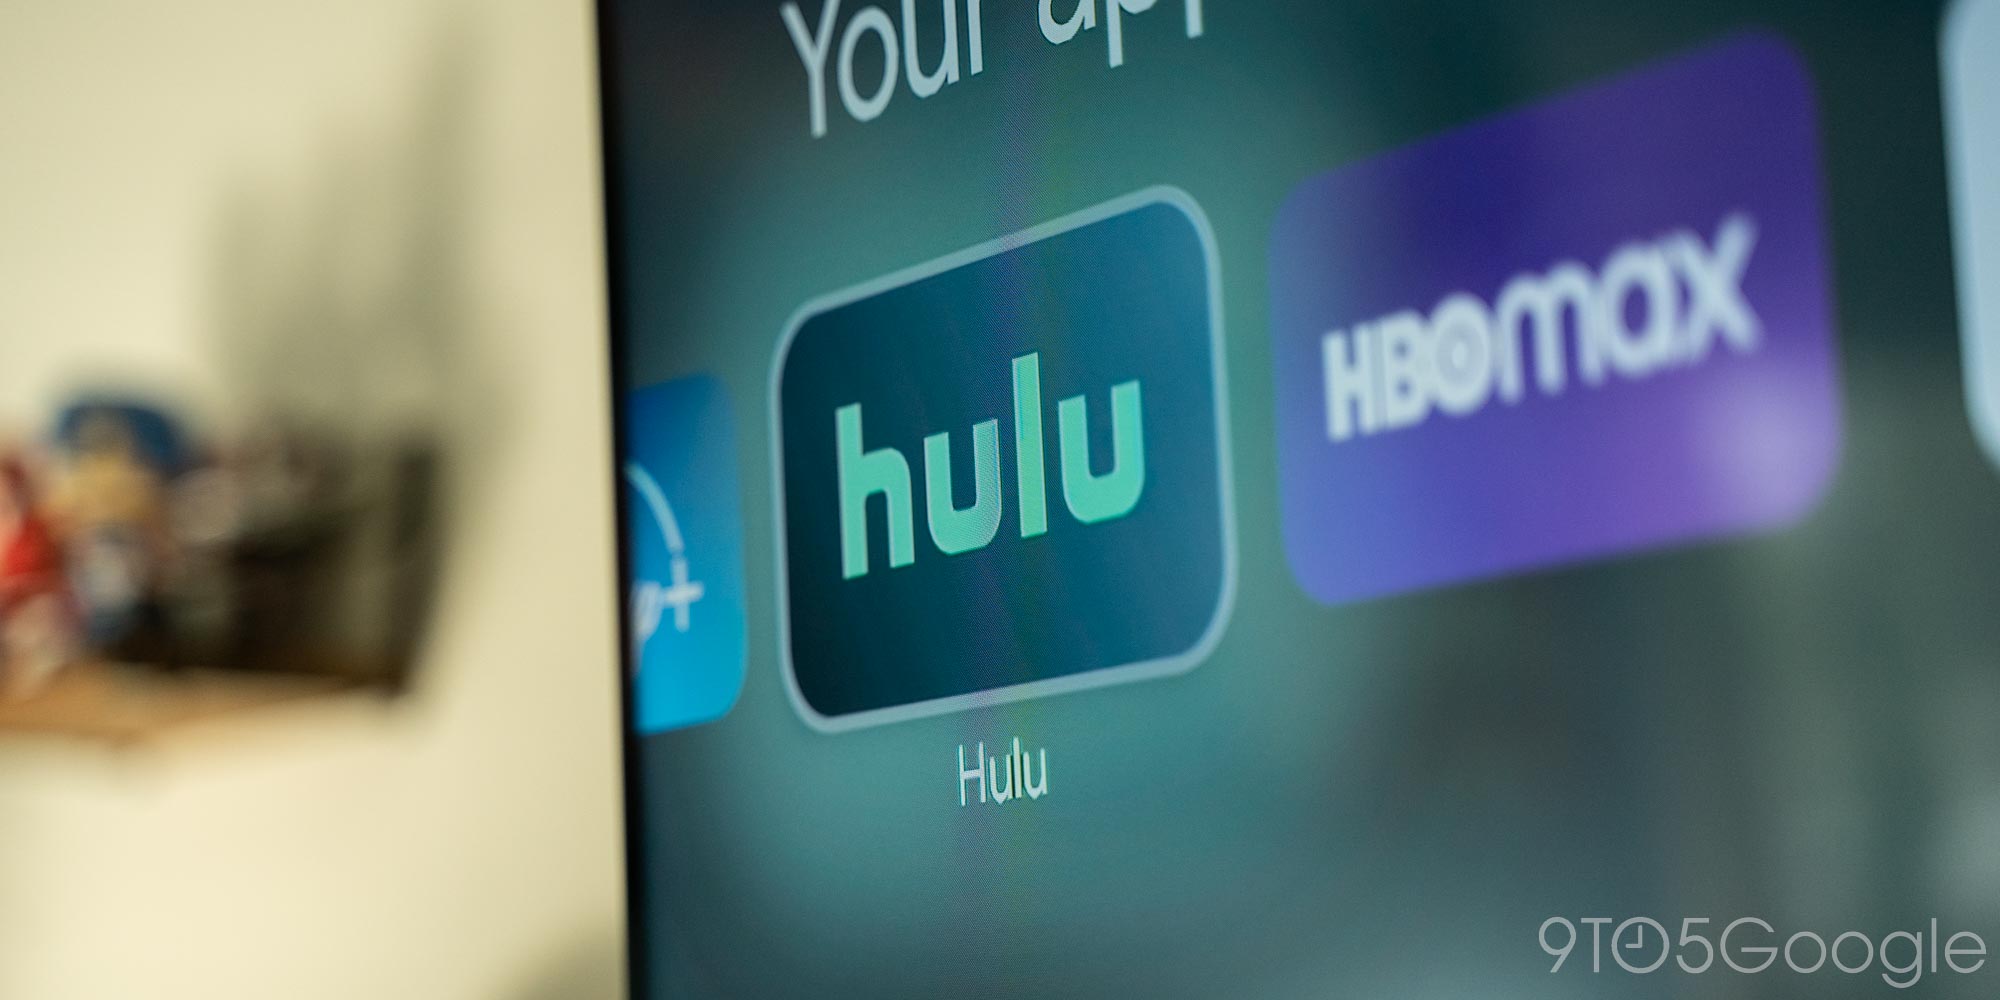 Hulu Adds PBS Kids, Local PBS Stations & Magnolia Network To Live TV  Channel Lineup - Hulu